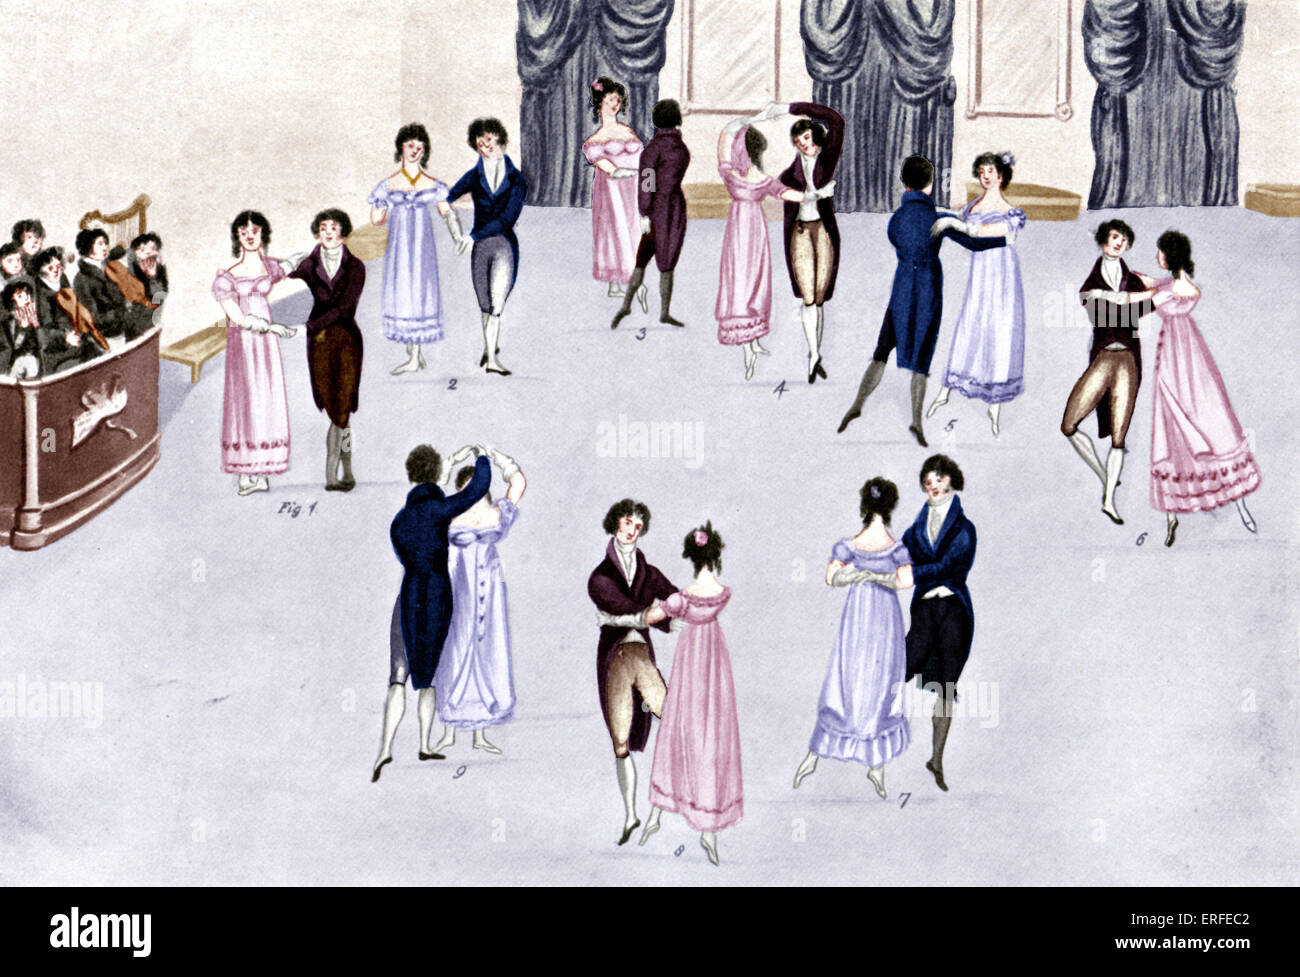 Waltzing couples in early 19th century. Taken from the reference plate to Wilson's 'Description of German & French Waltzing' Stock Photo